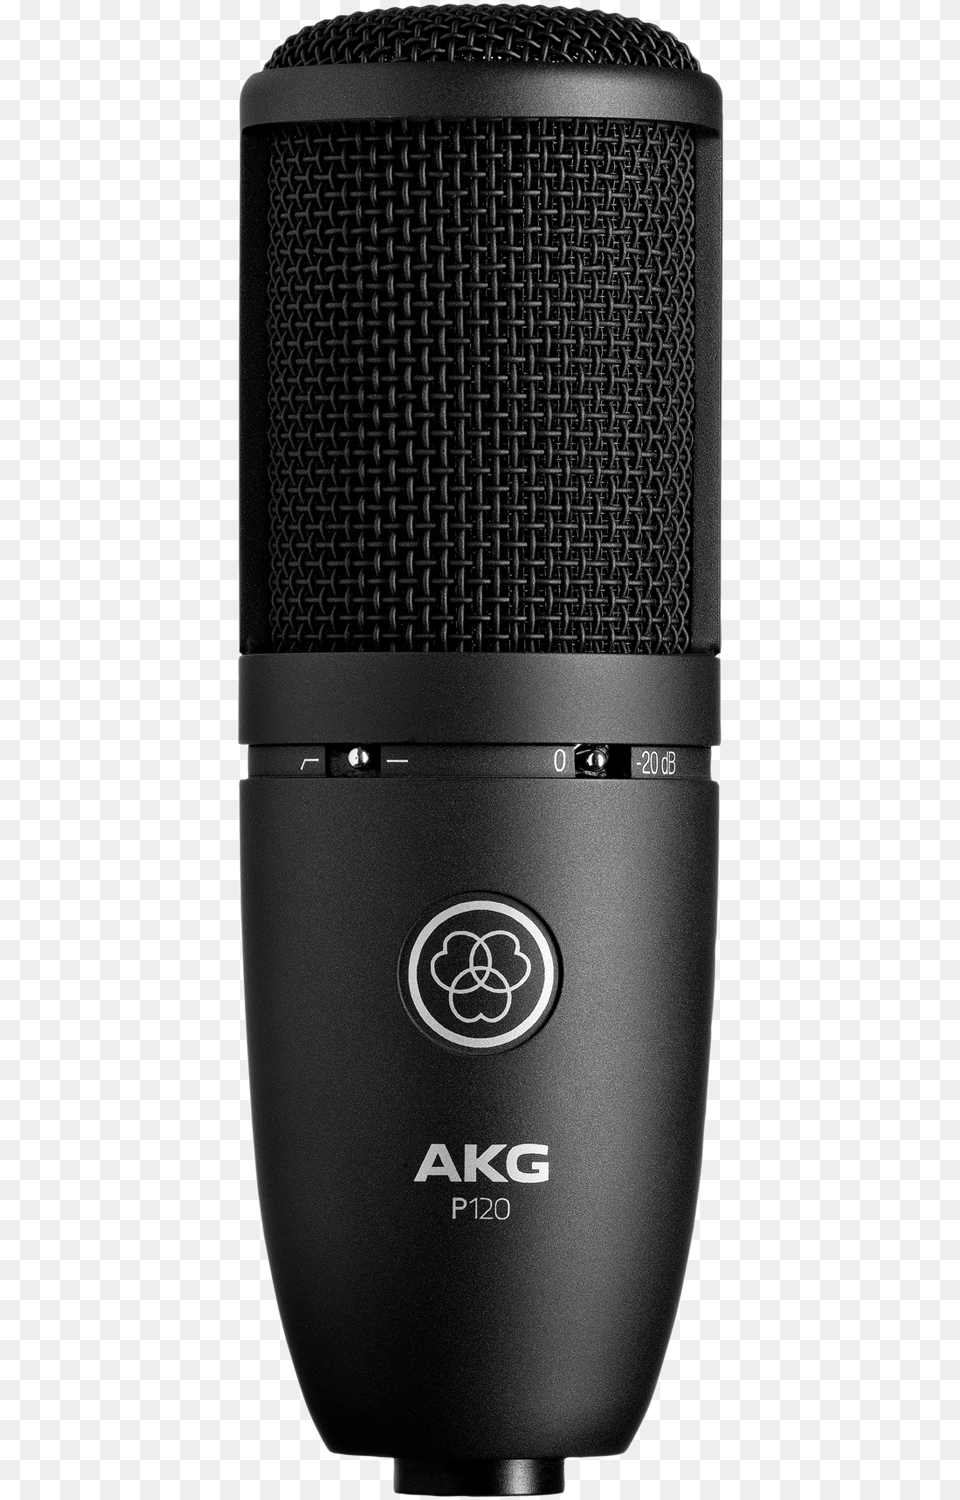 Alternate Views Condenser Mic Large Diaphragm Akg Perception, Electrical Device, Microphone Png